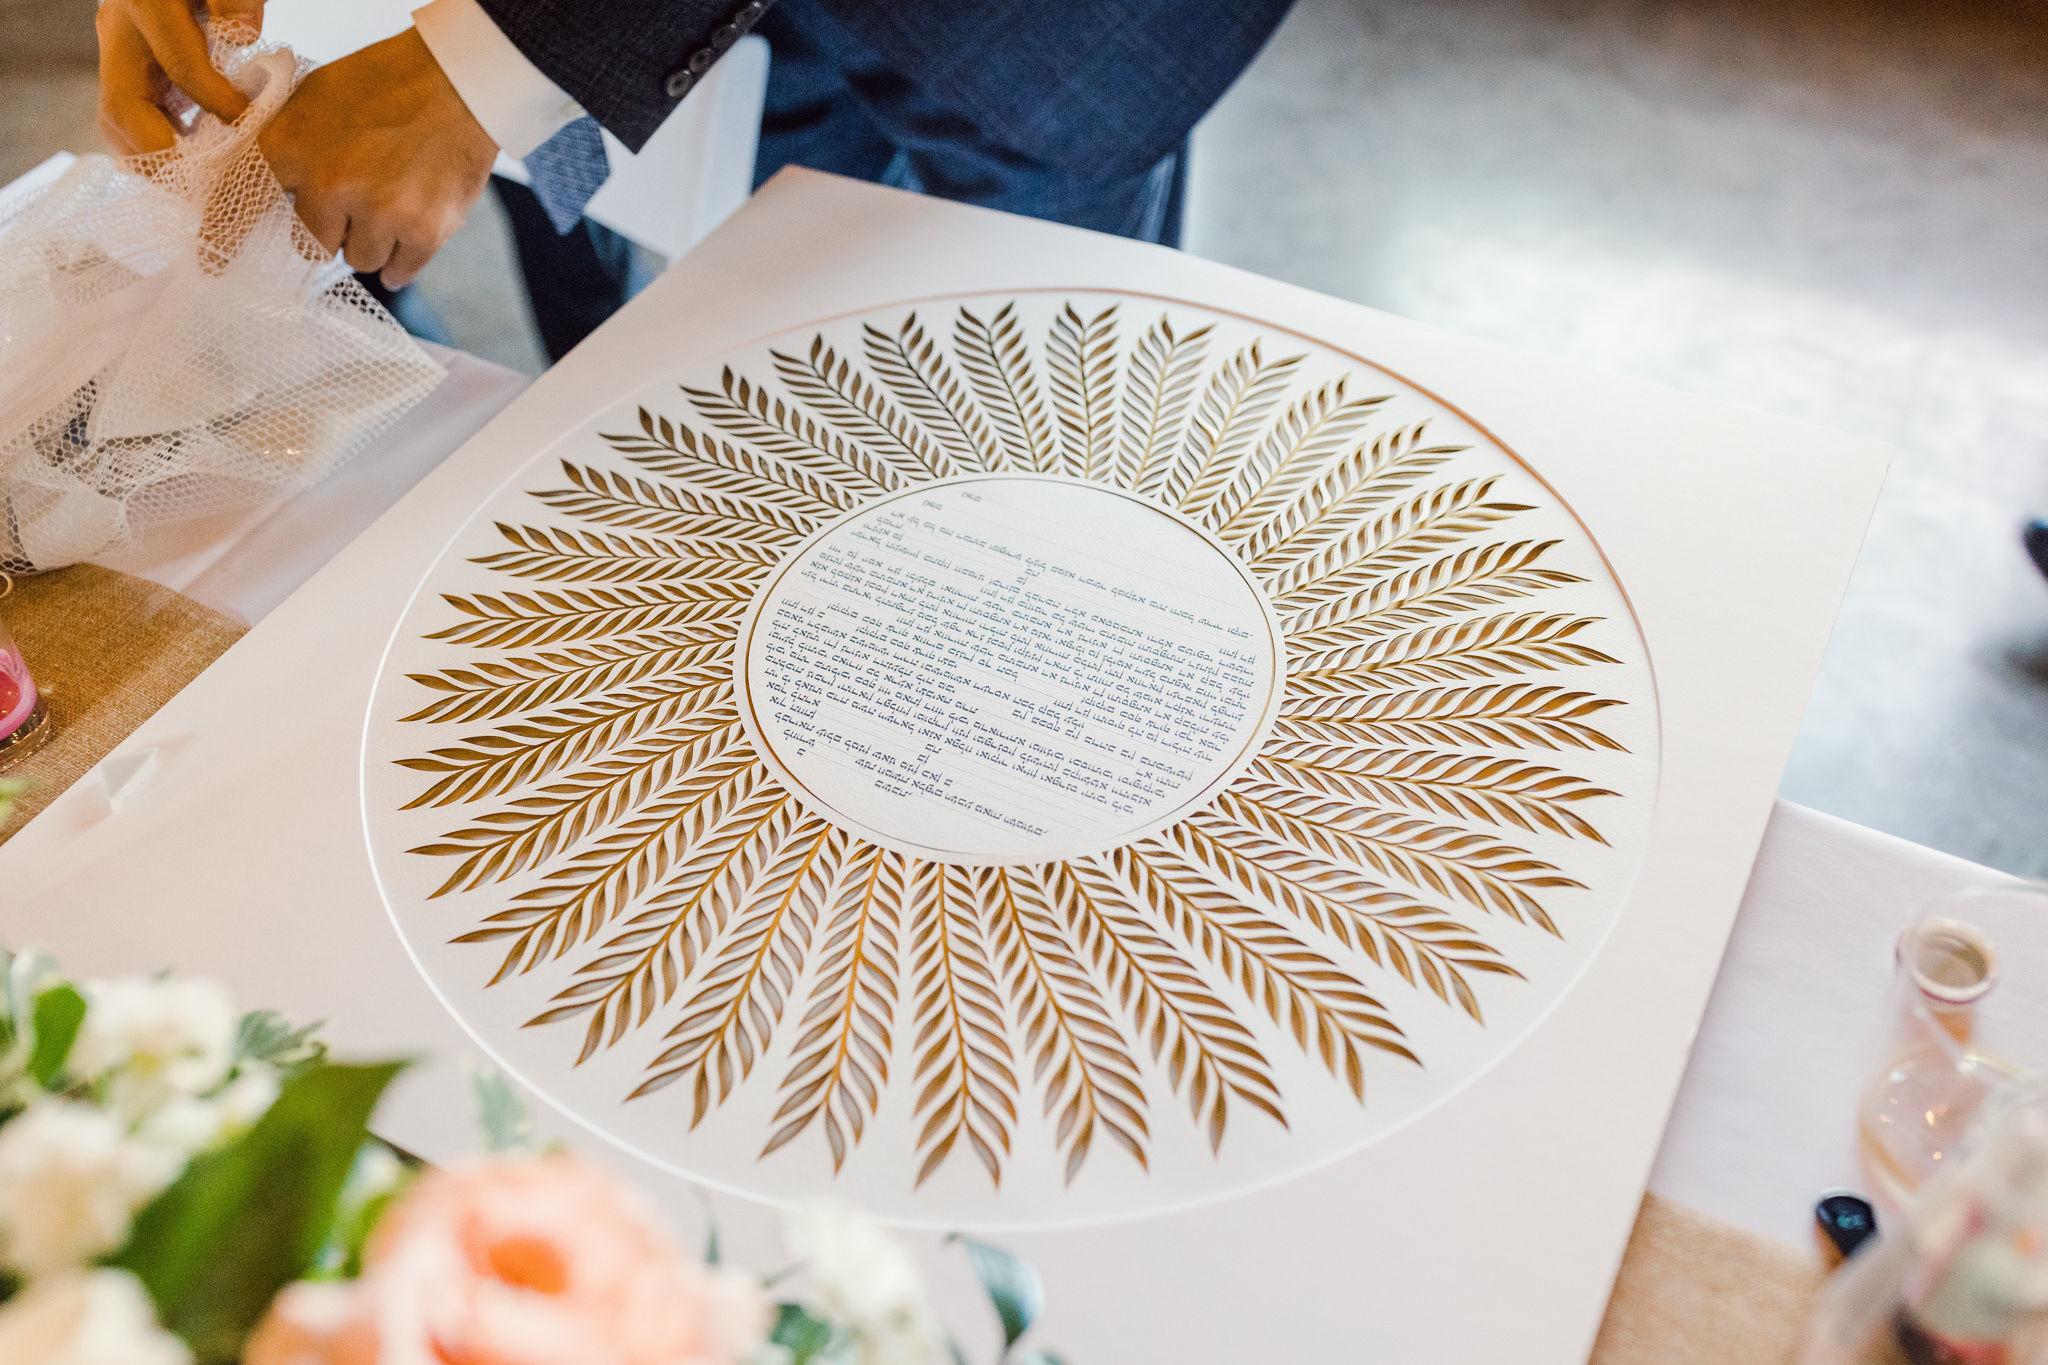 An example of a modern, artistic Ketubah with abstract design